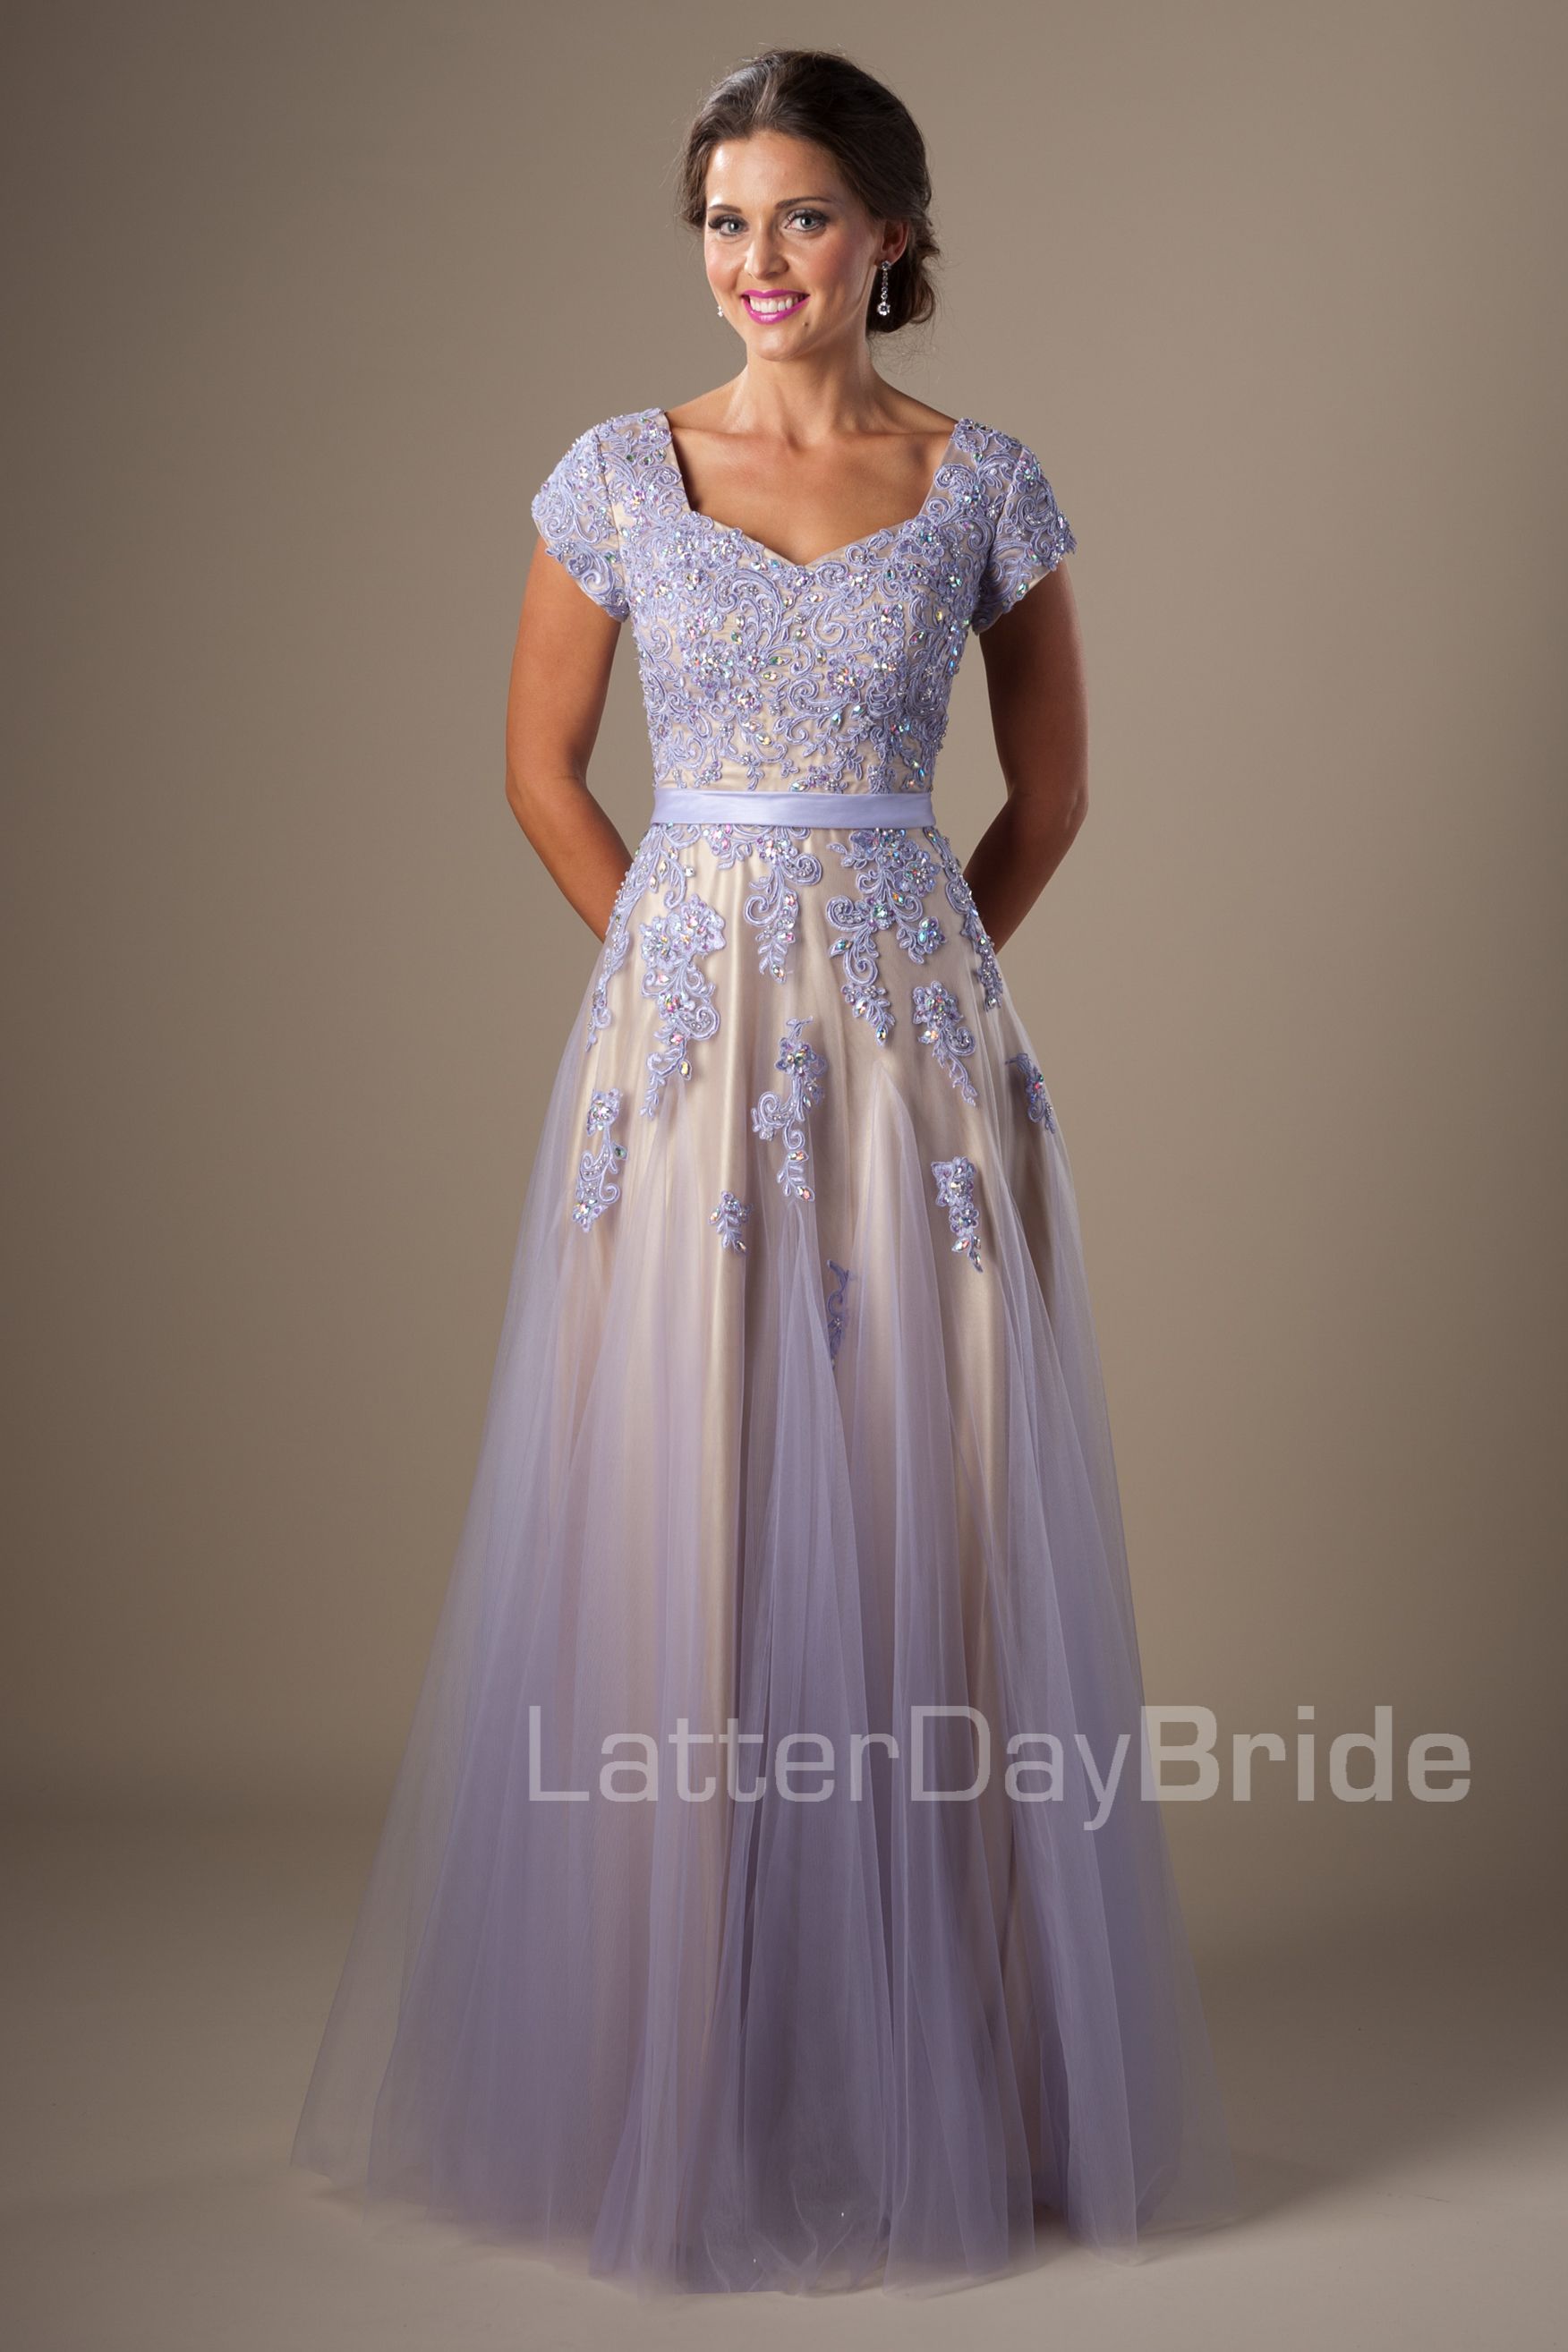 Beaded Lavender Lace Tulle Long Modest Prom Dresses With Cap Sleeves ...